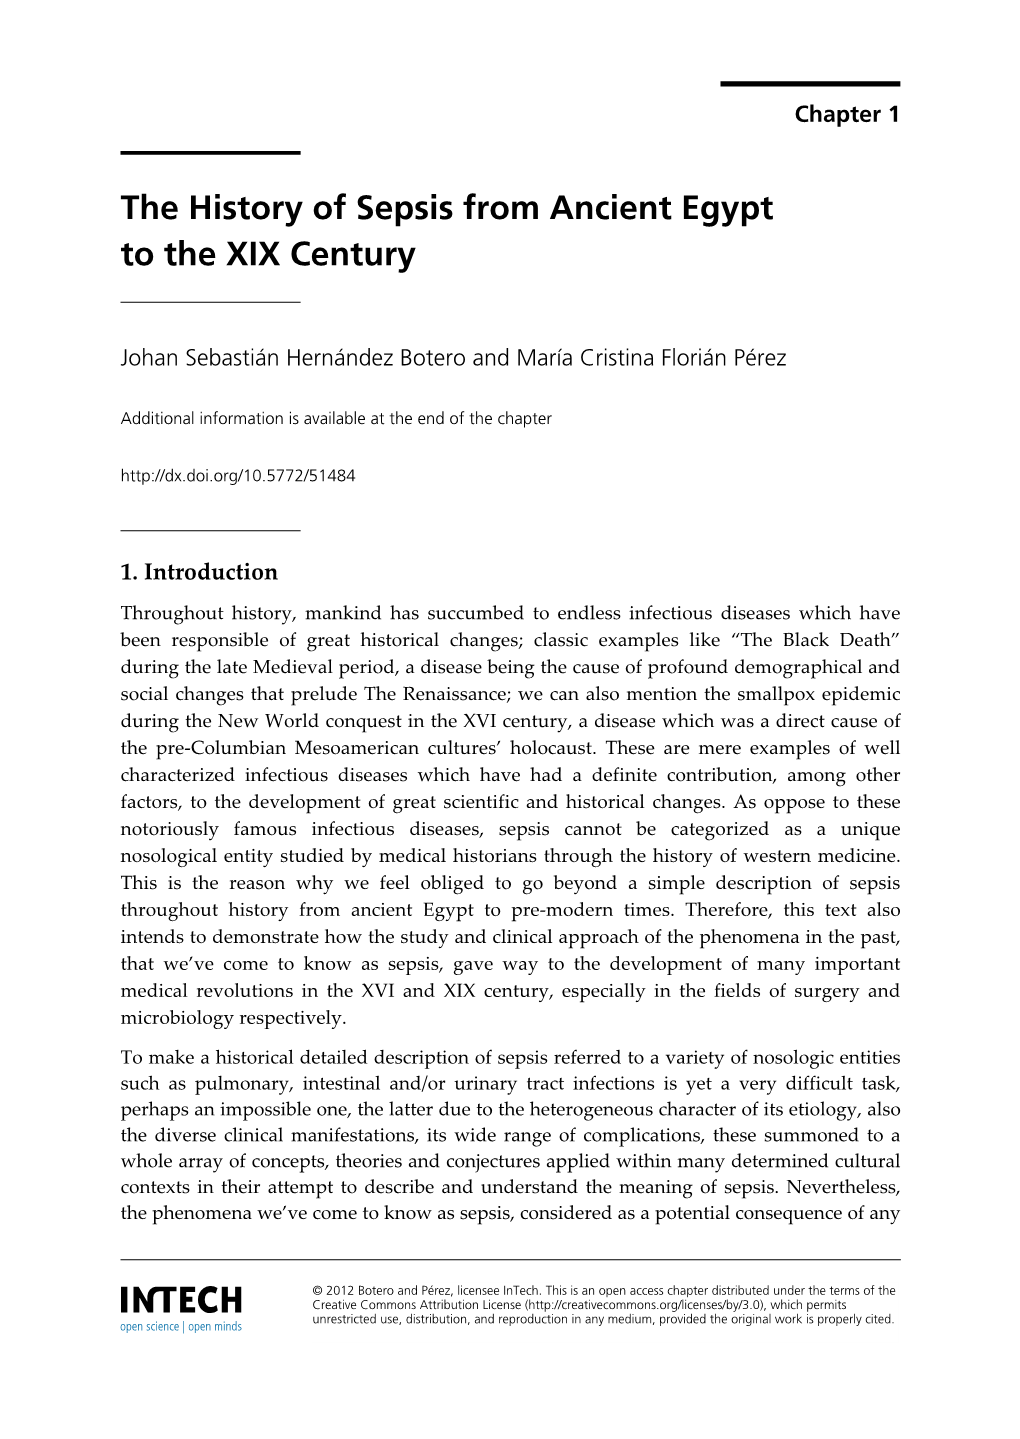 The History of Sepsis from Ancient Egypt to the XIX Century